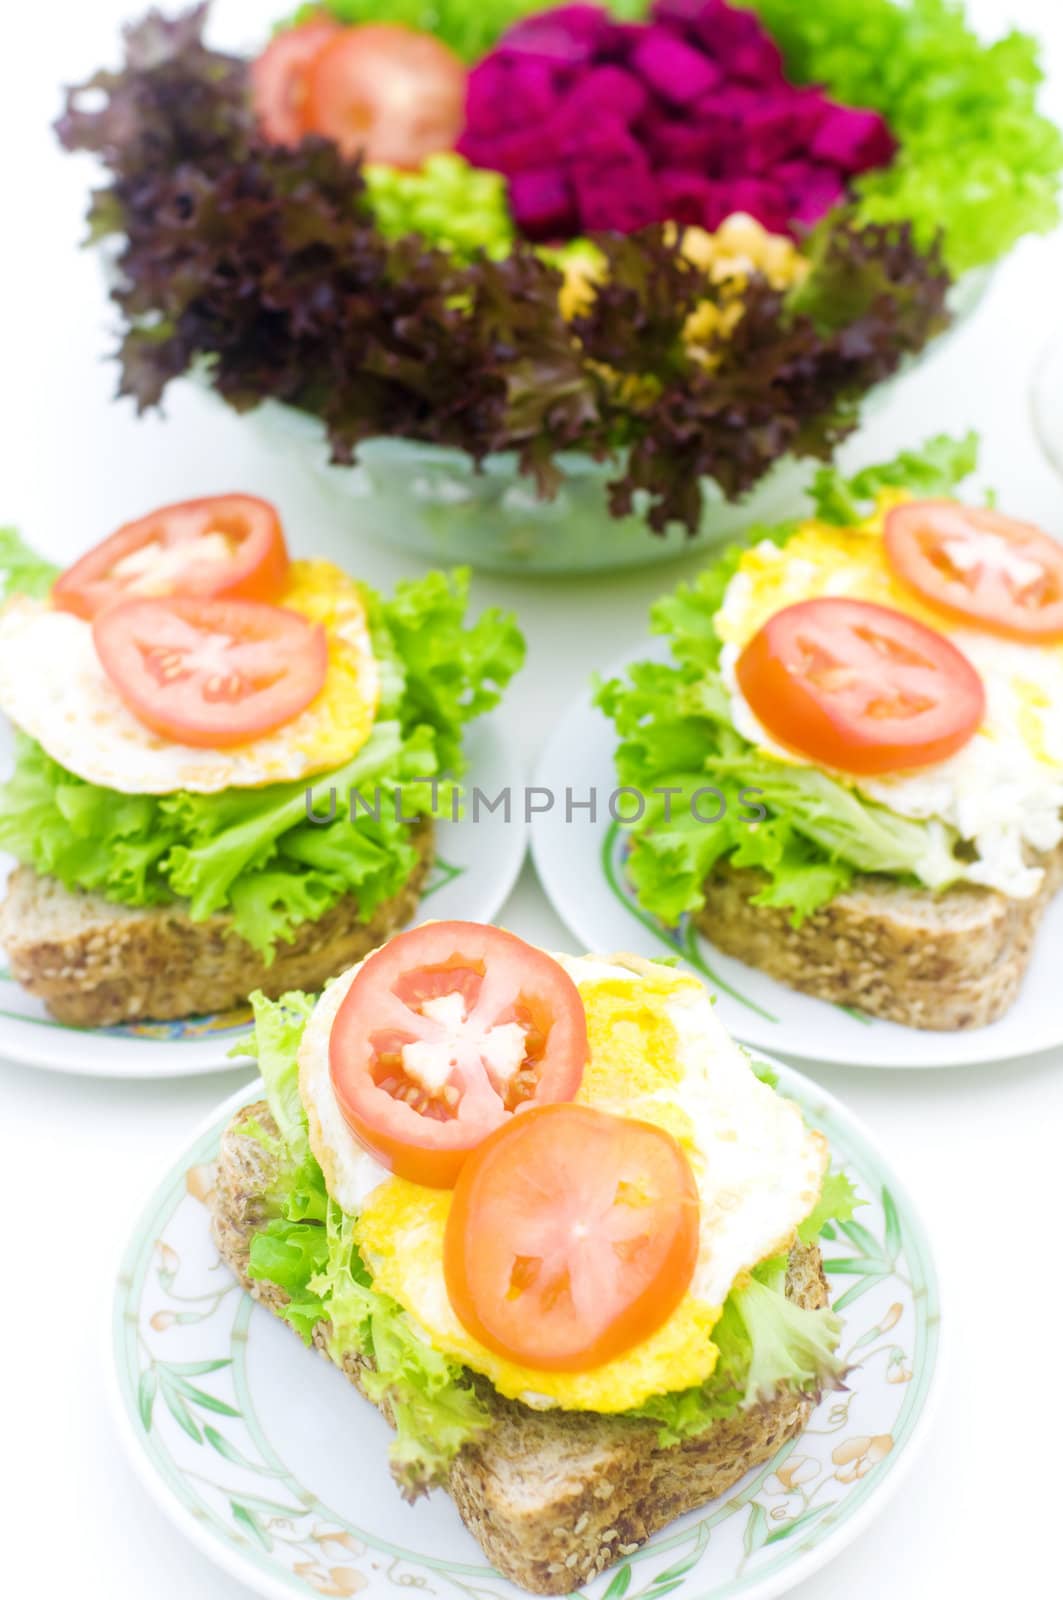 Asian style healthy organic homemade sandwich and salad breakfast.